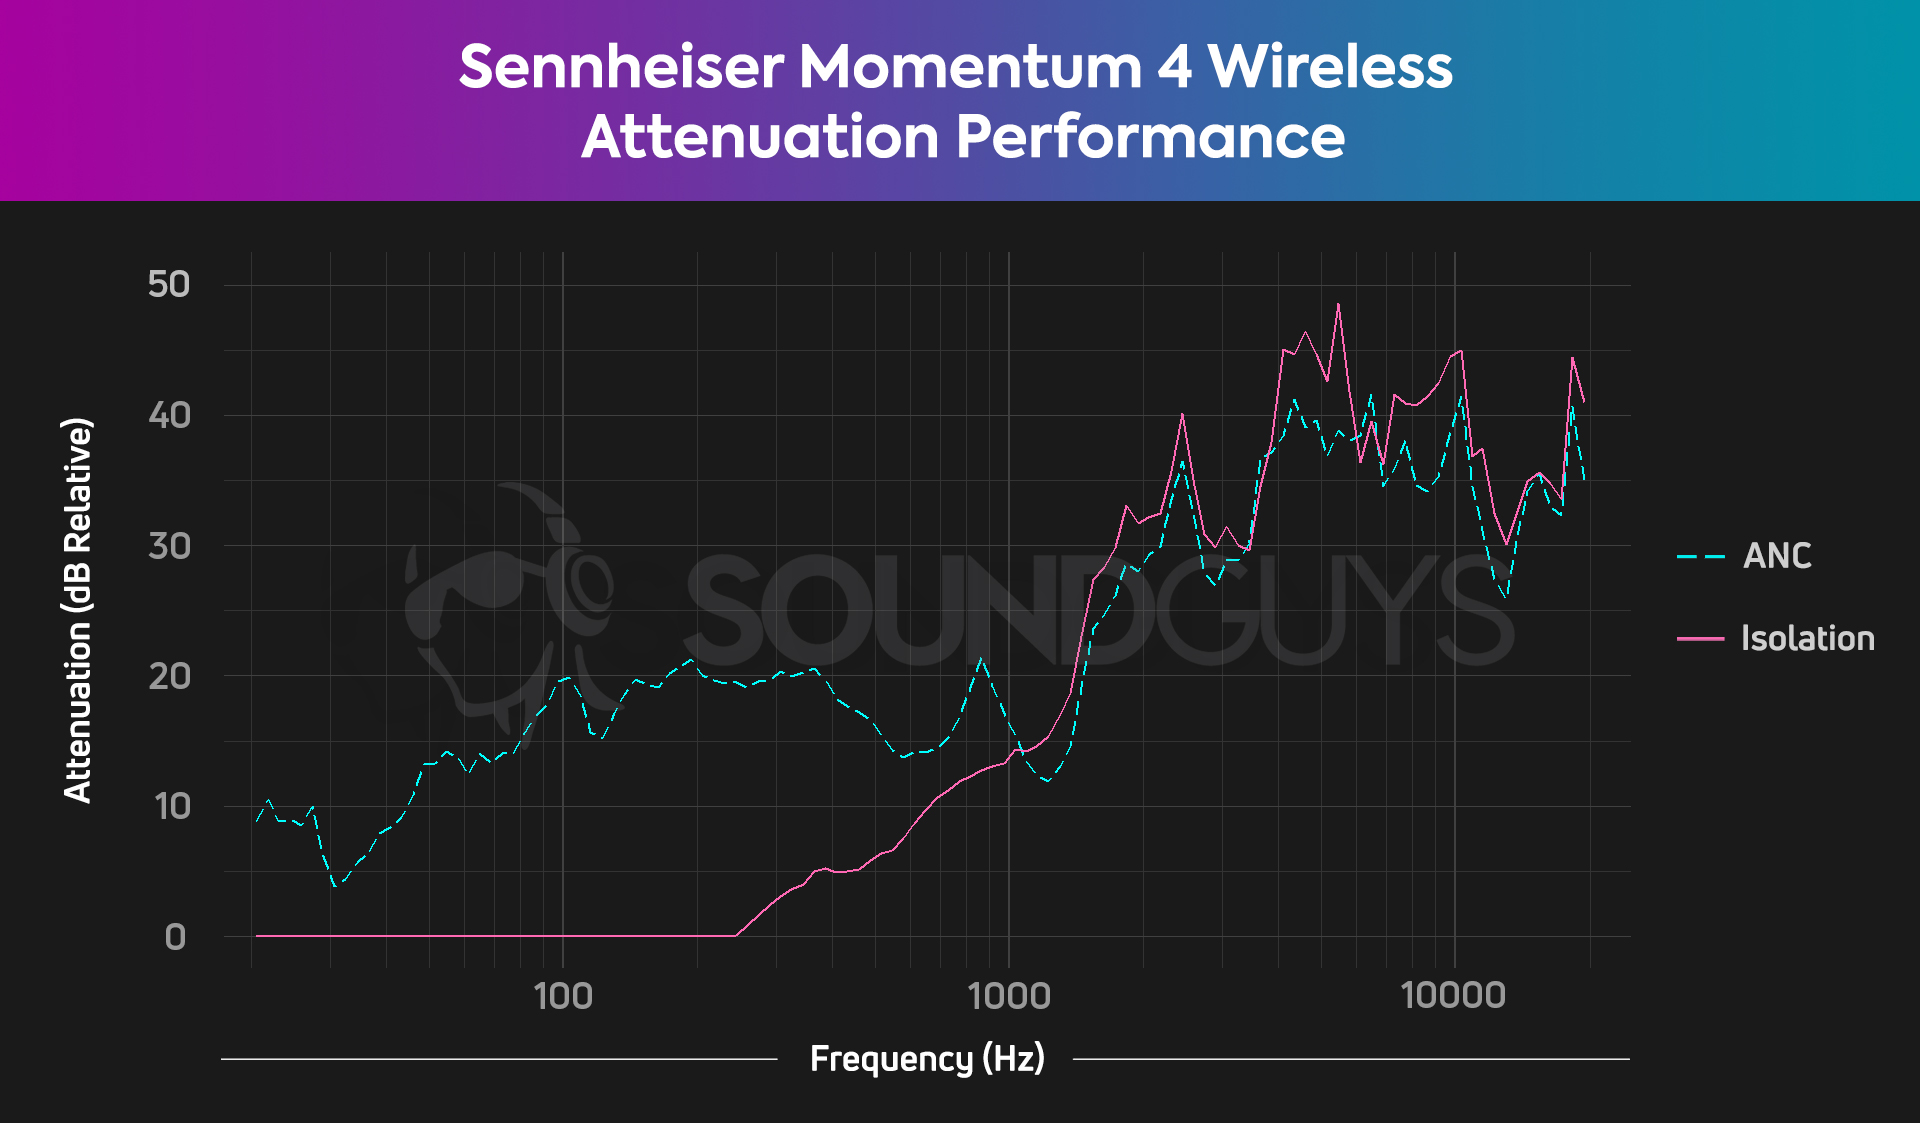 A chart showing the attenuation performance of the Sennheiser Momentum 4 Wireless, able to block out anywhere between 75 and 93% of outside noise depending on frequency.